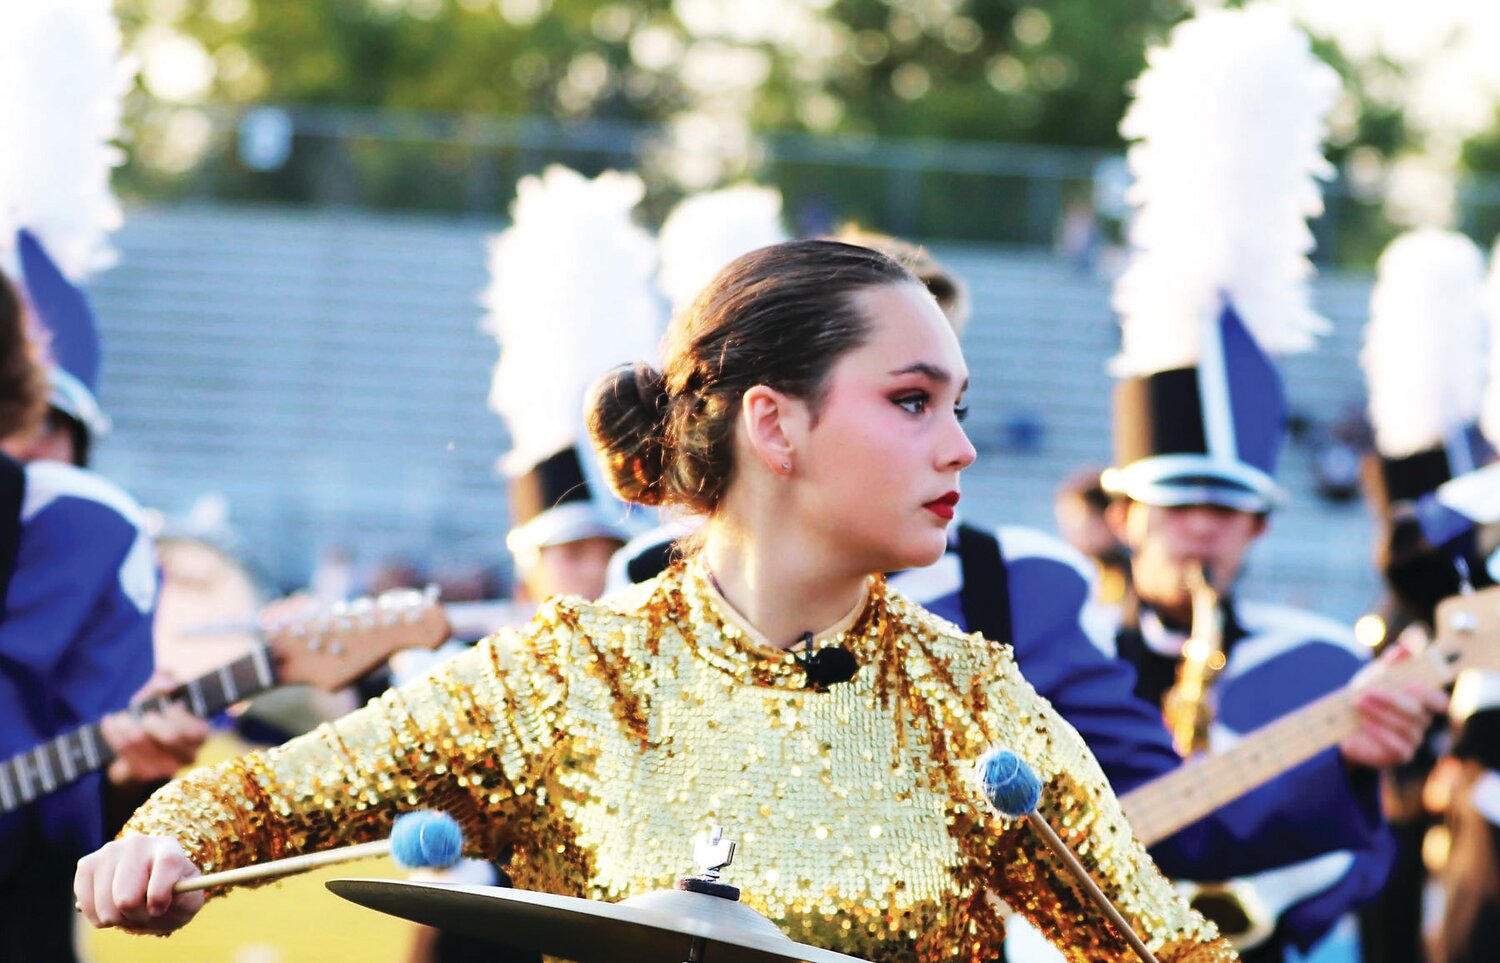 In addition to appearing in musicals at Central Bucks, Olivia Giampolo is a drum major for the CB South Marching Titans, she has played piano in the CB South Jazz Band and sung in the school's Chamber Choir.